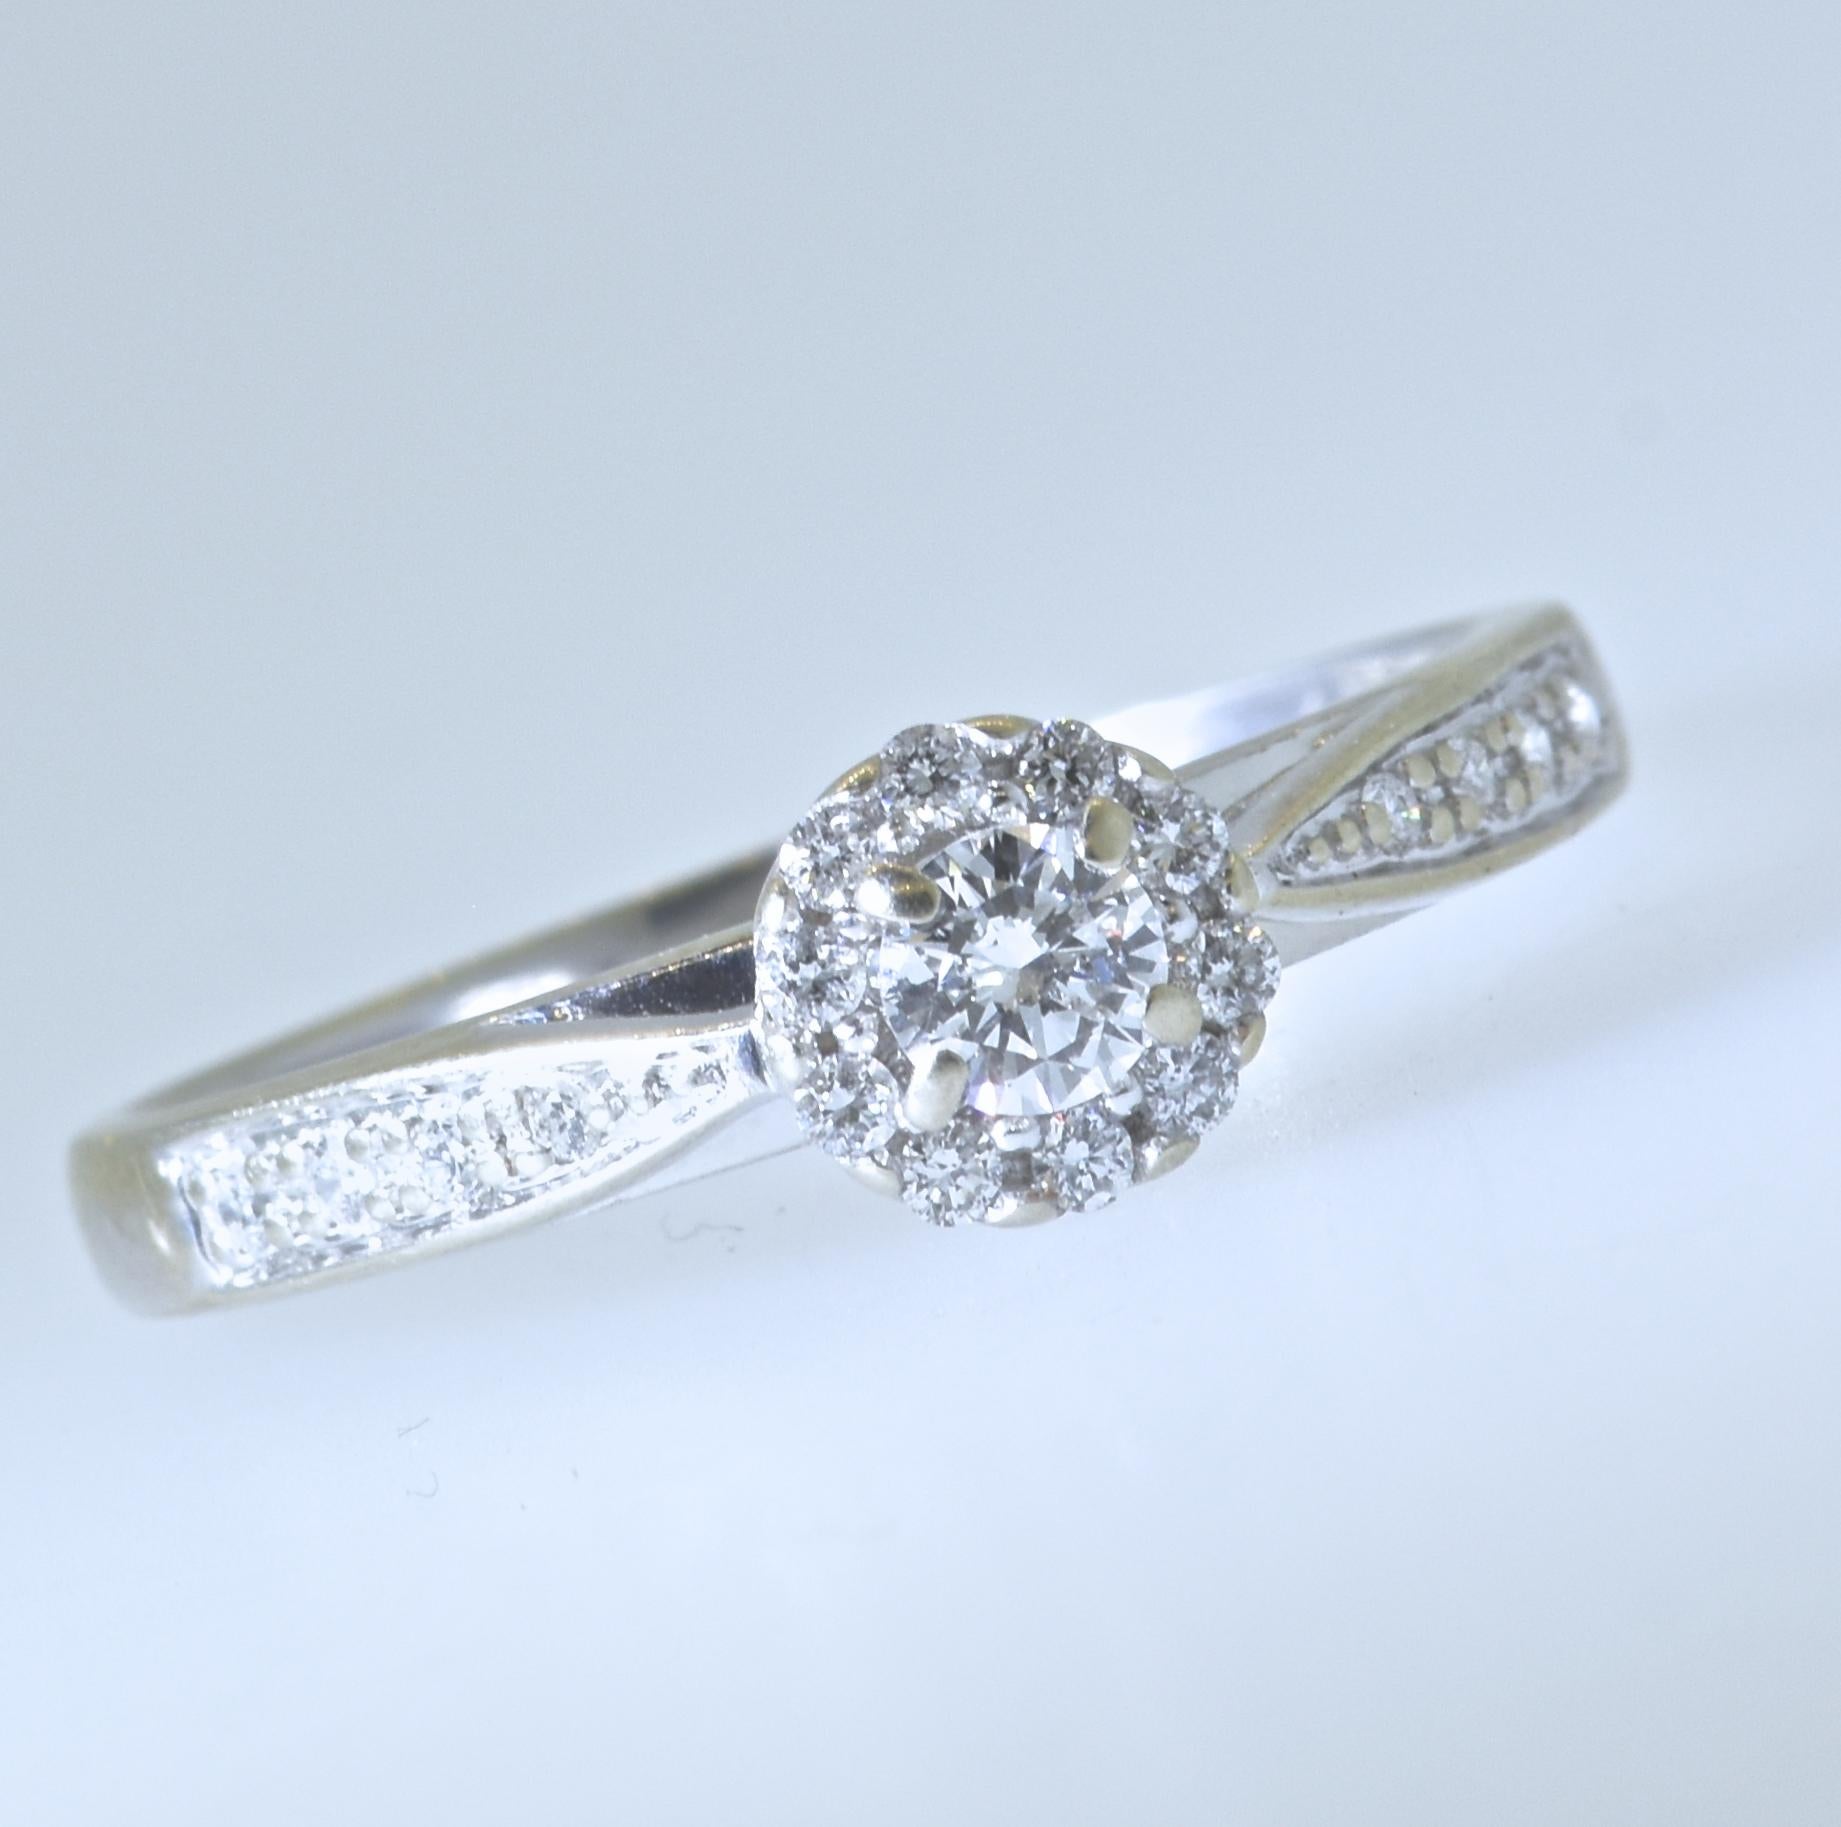 Halo Style Diamond & White Gold Ring In Excellent Condition For Sale In Aspen, CO